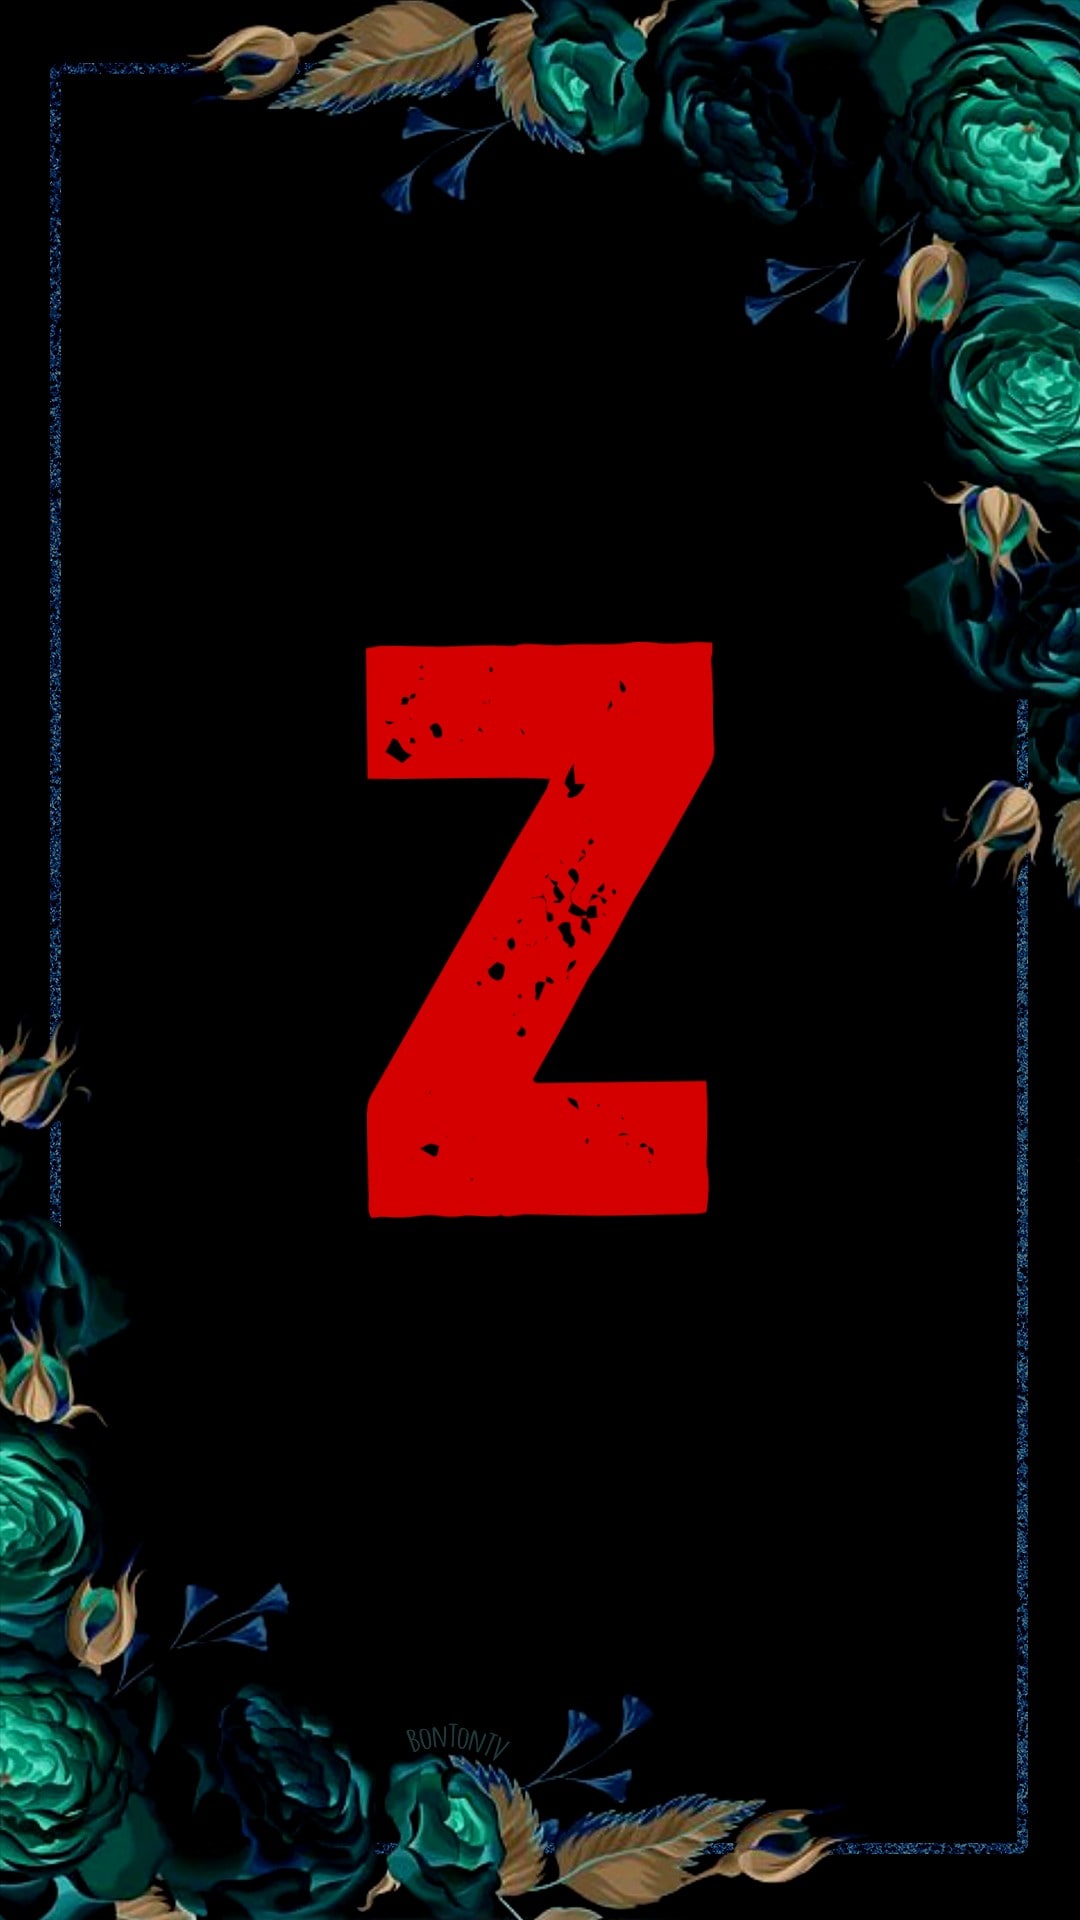 Z Alphabet in Red - Letter And Alphabet Quotes at statush.com